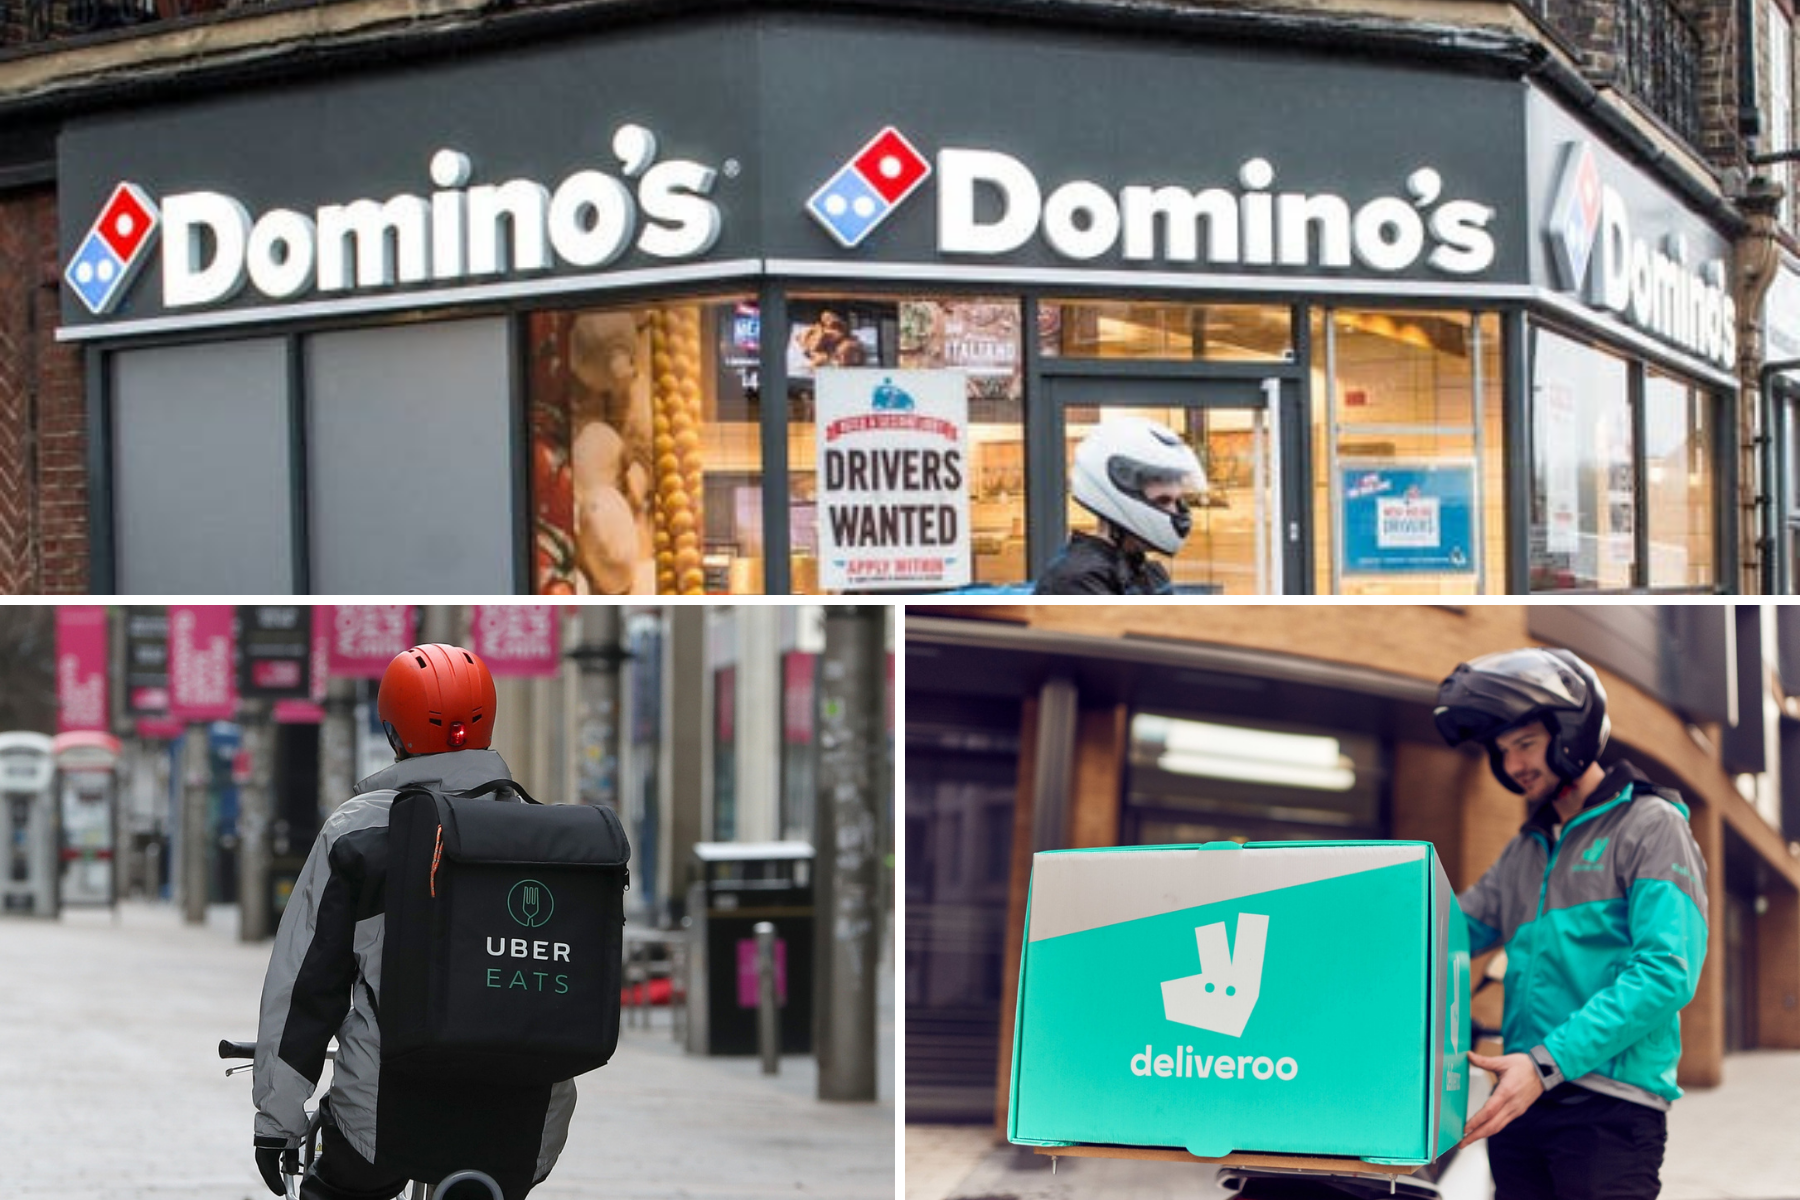 The best takeaway discounts and deals at Domino's, Deliveroo and Uber Eats